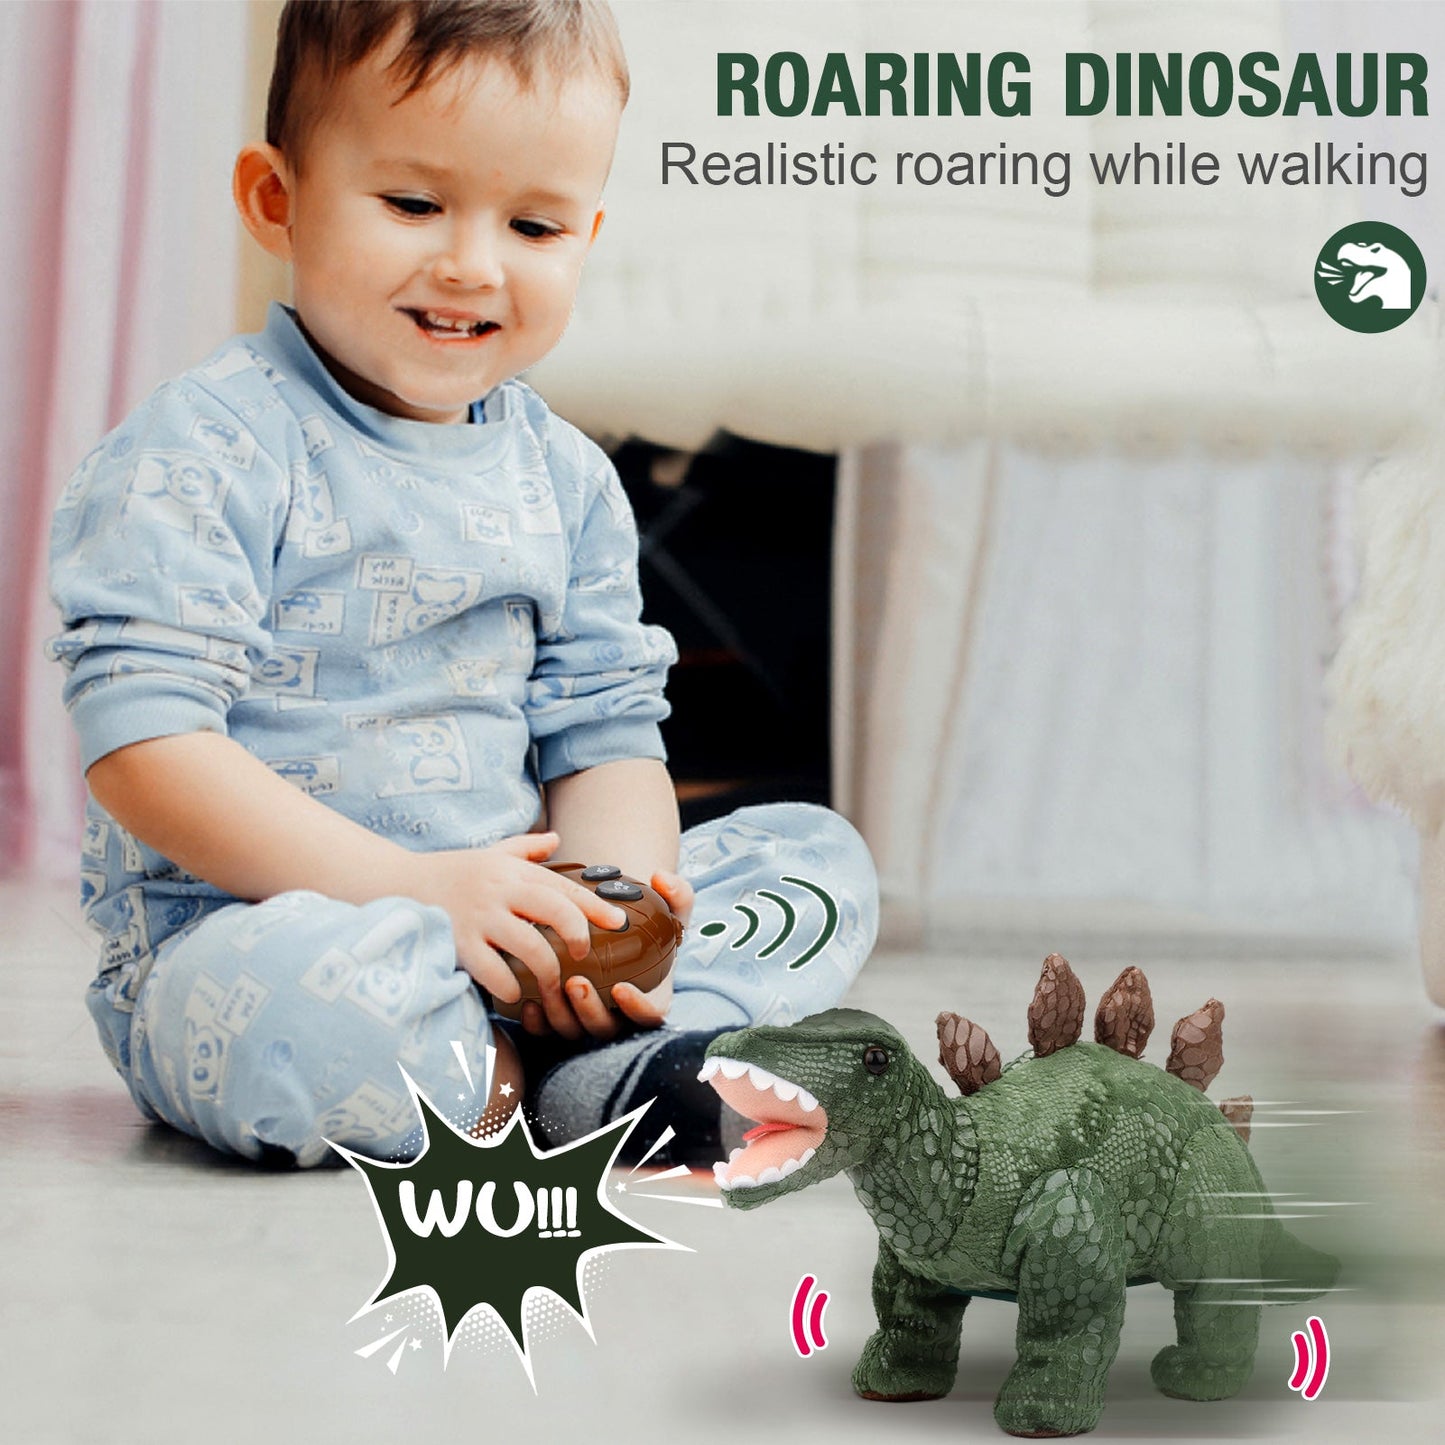 New Remote Control Dinosaur with Jurassic World Toys_3